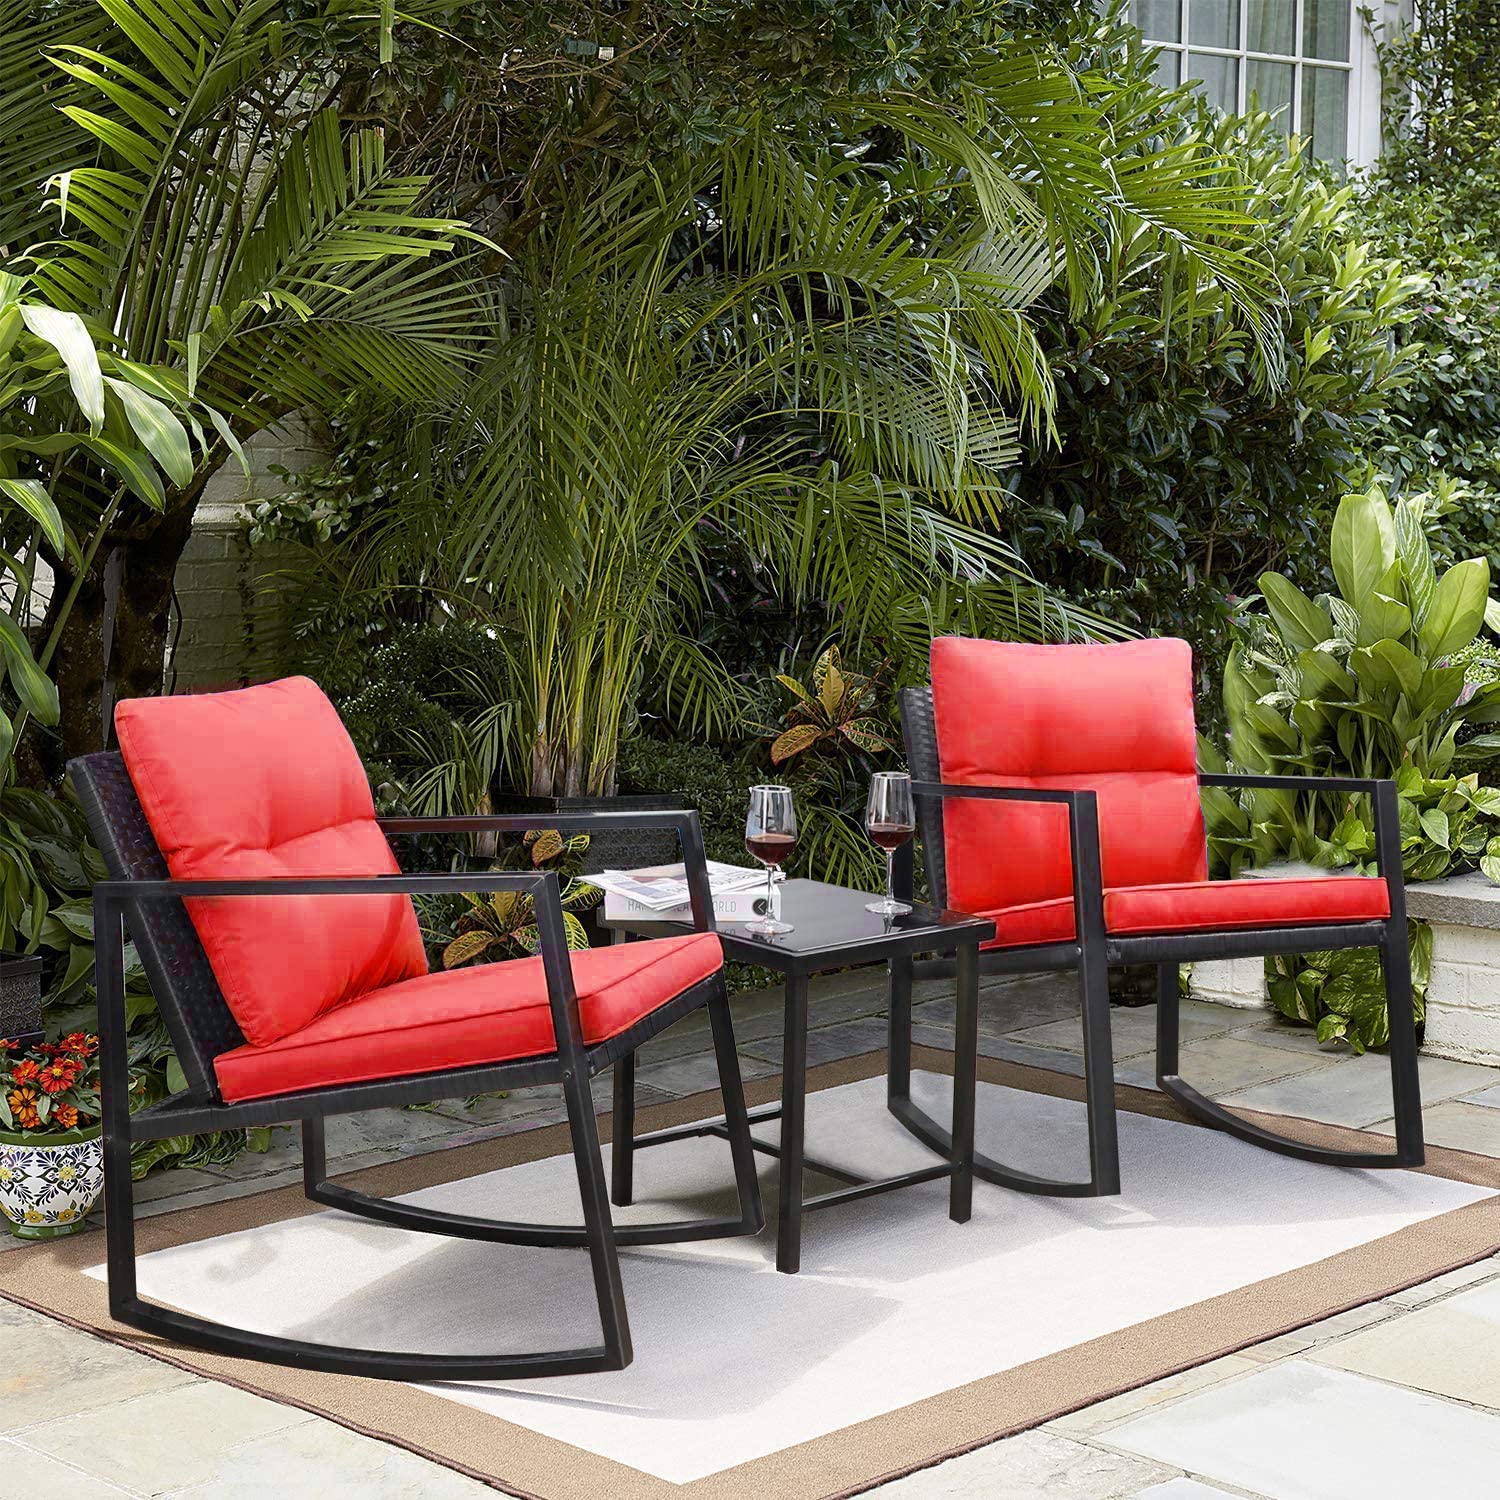 3 Piece Outdoor Patio Furniture Set Black Wicker Red Cushions Bistro Rocking Chairs Table